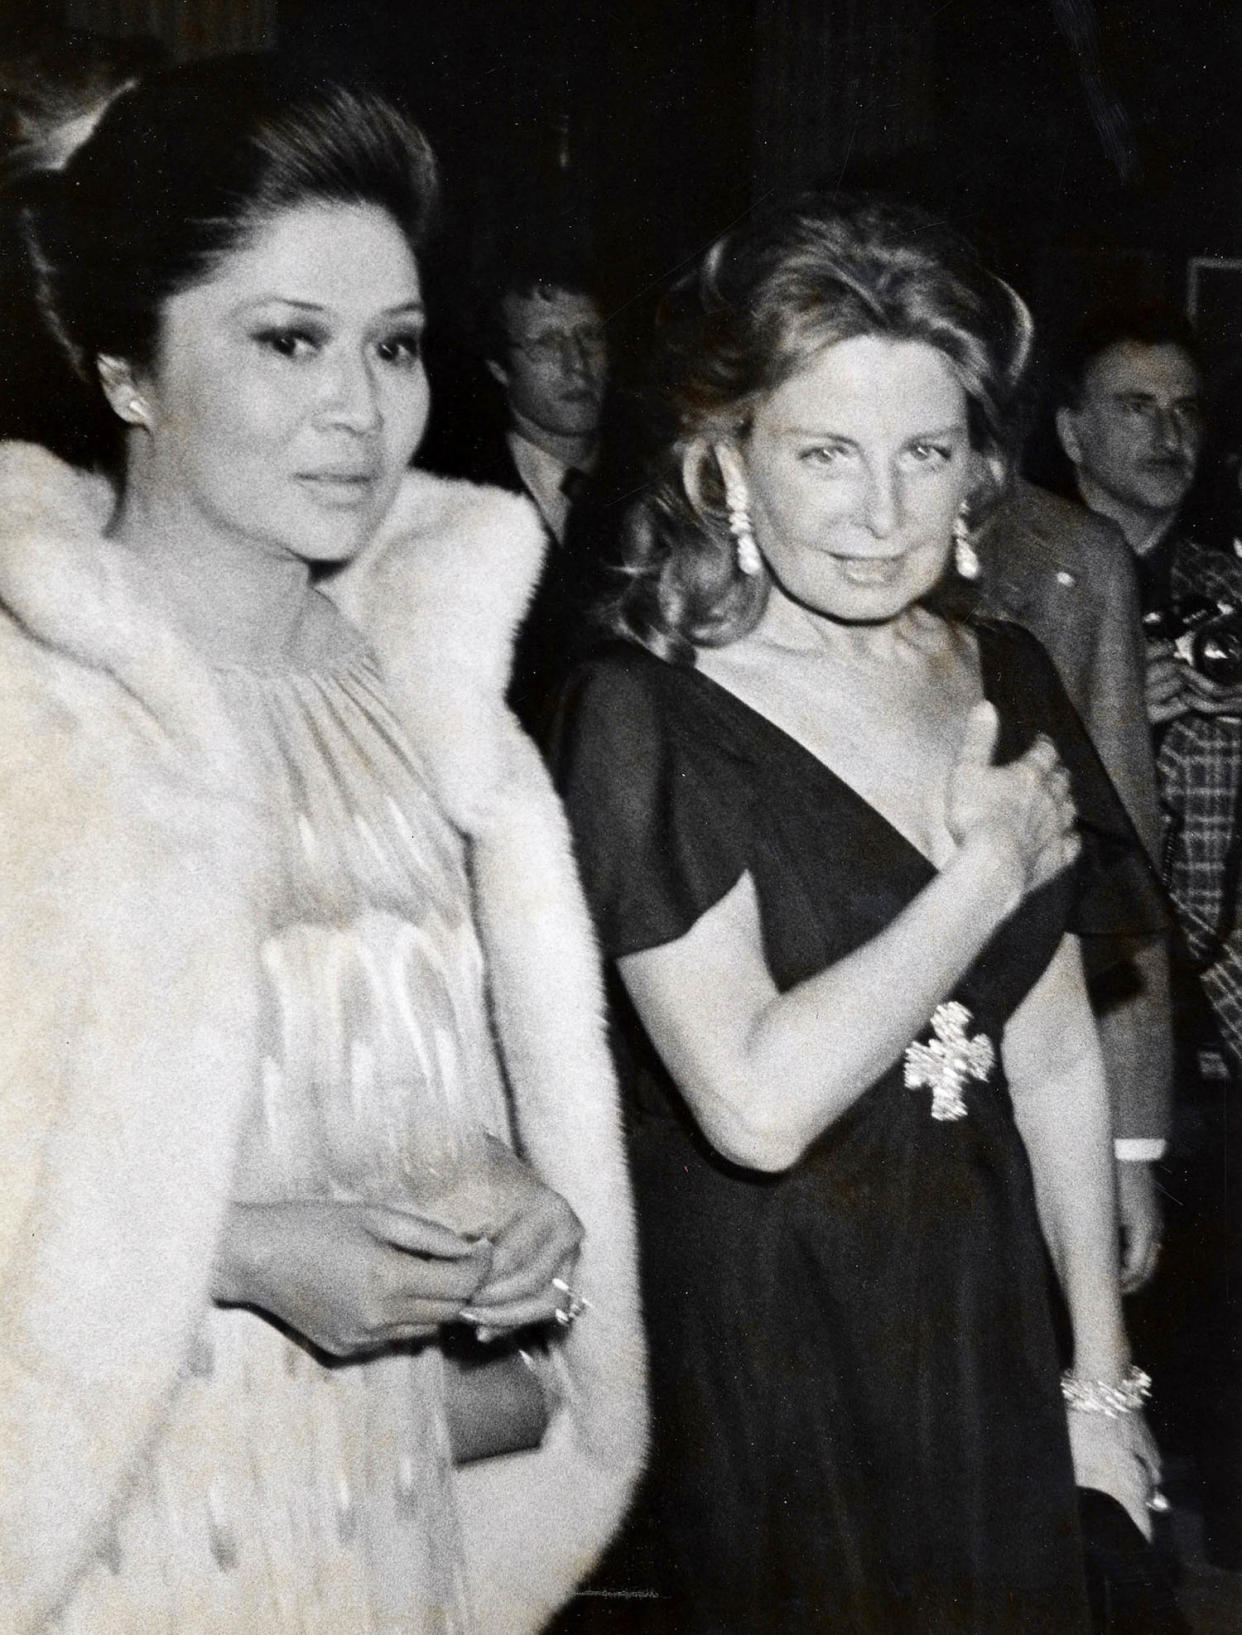 Imelda Marcos and Christina Ford  (Ron Galella Collection via Getty)